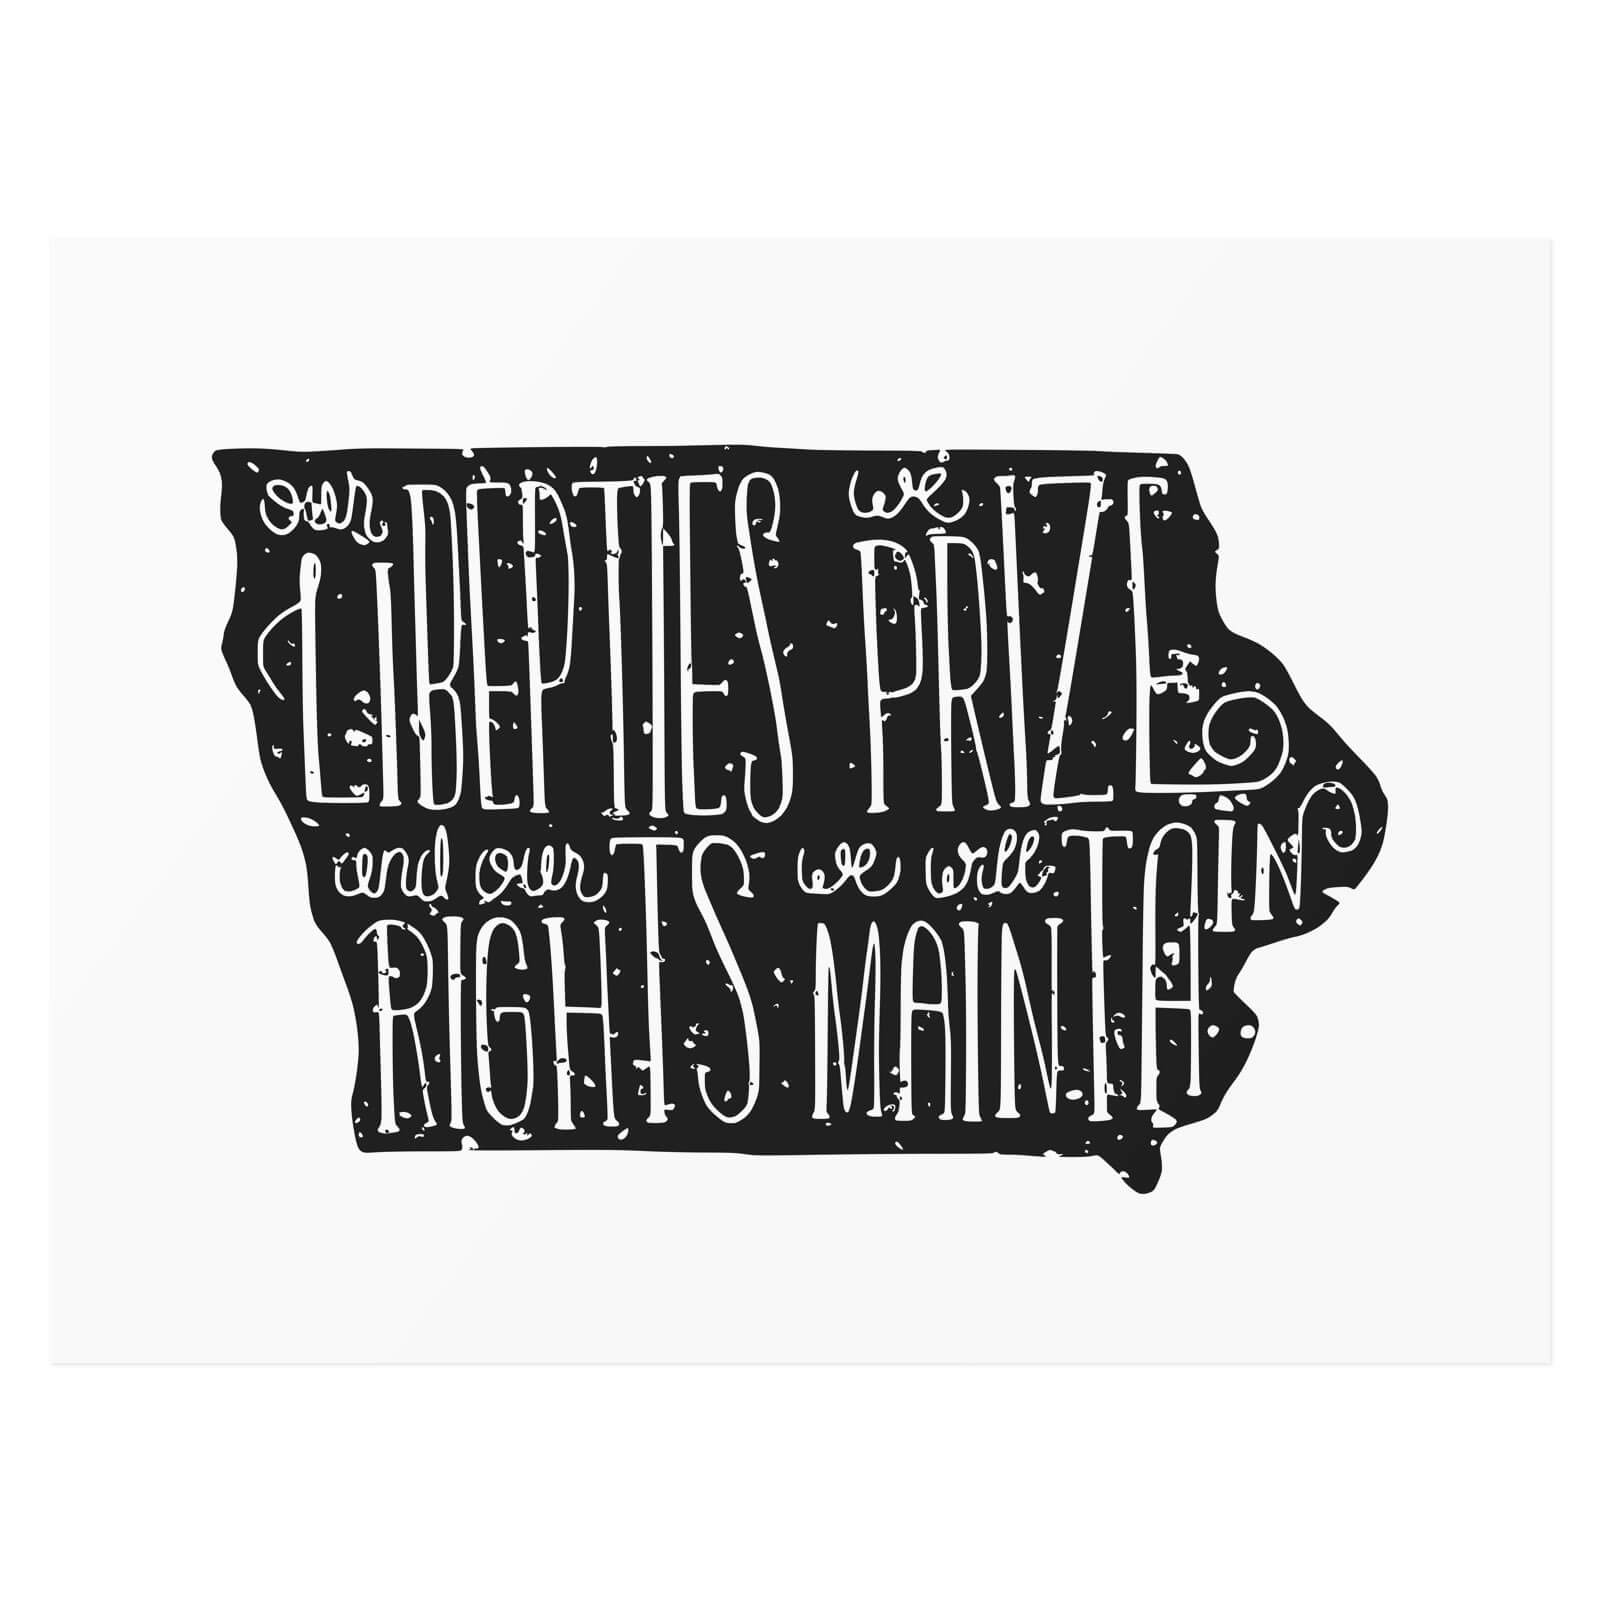 Iowa — Our liberties we prize and our rights we will maintain